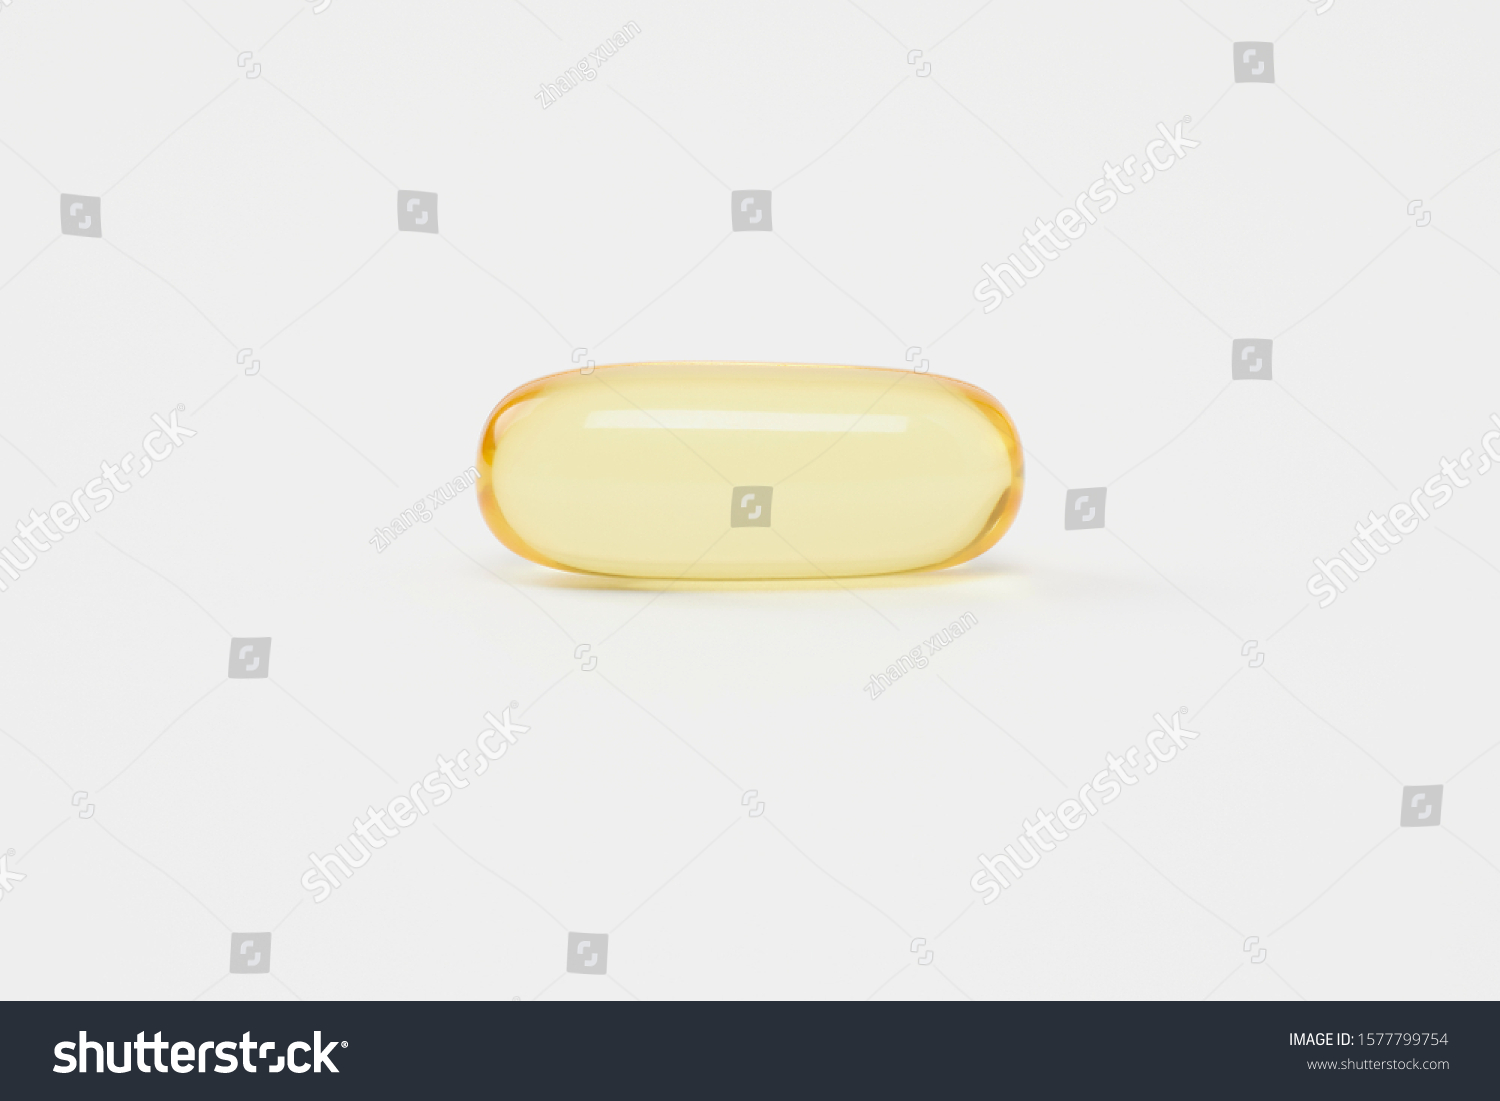  A grain of Fish Oil on white background #1577799754